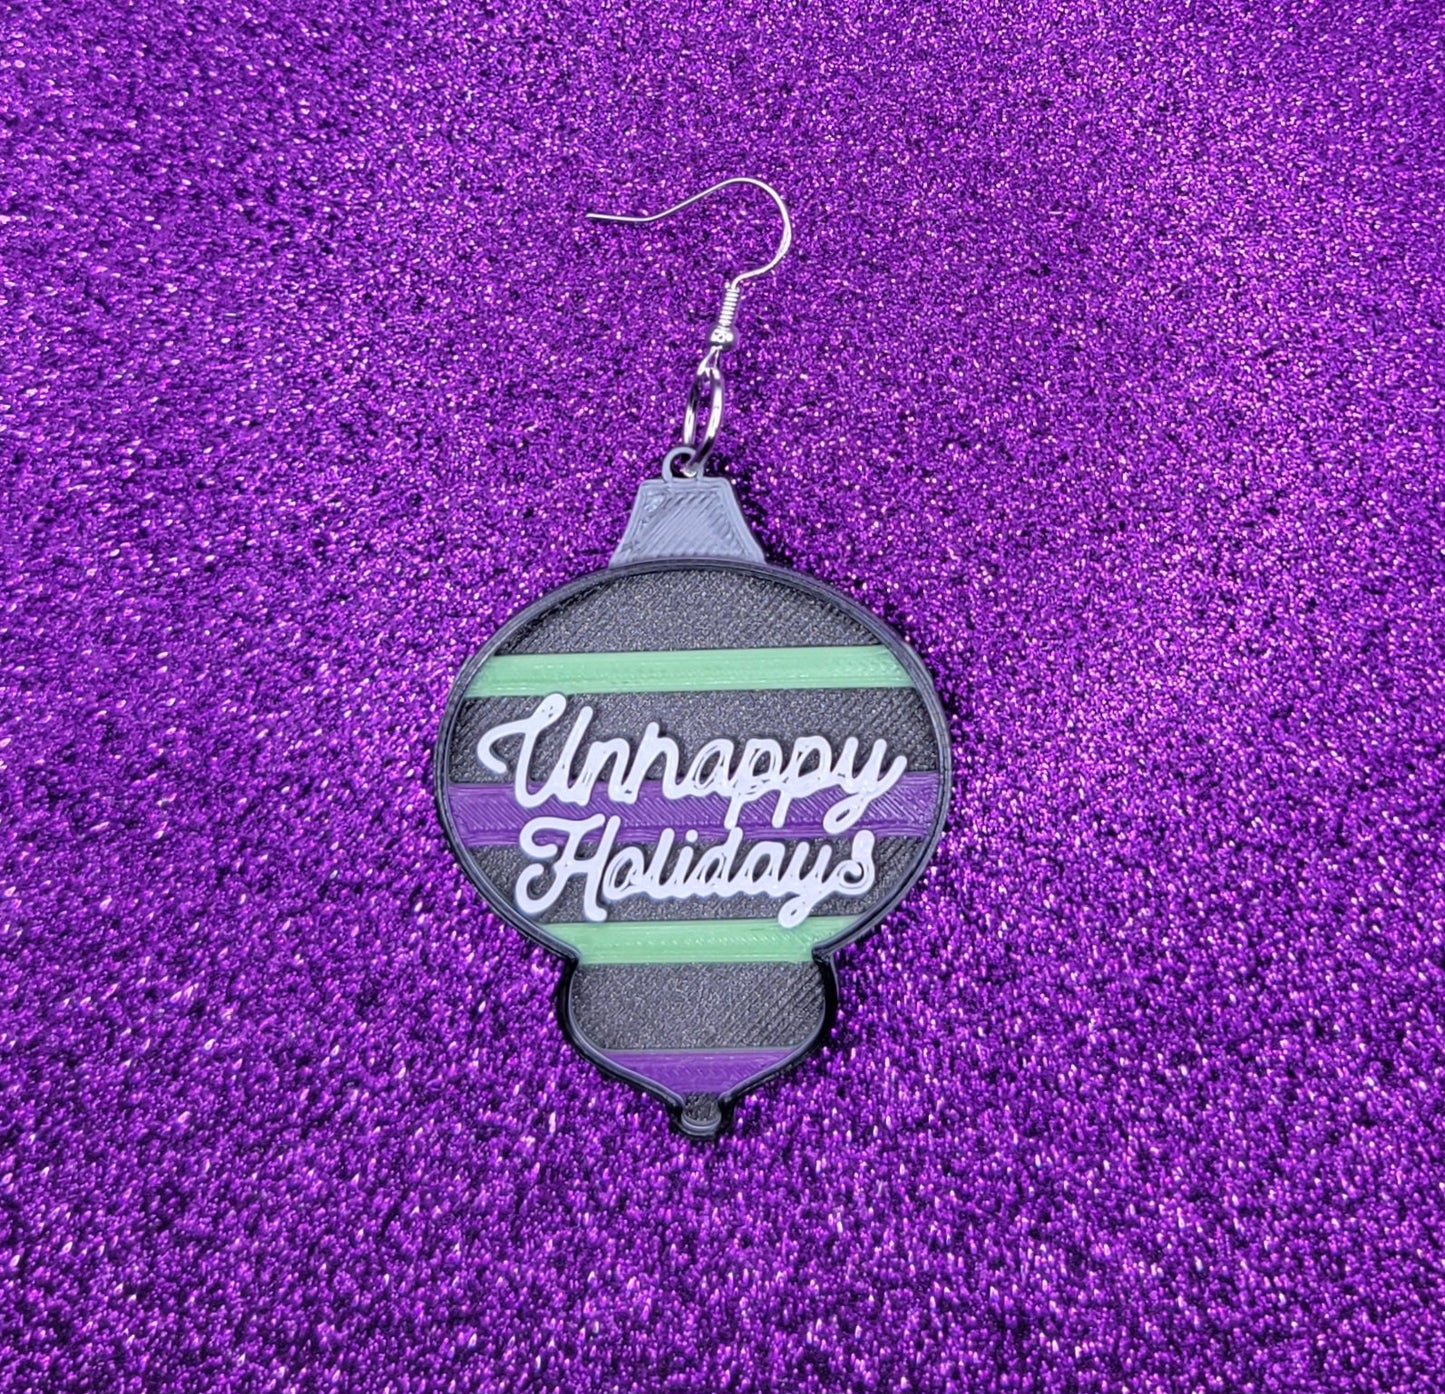 Unhappy Holidays Christmas Ornament Earrings 3D Printed Weird Earrings, Unique Earrings, Edgy Earrings, Drop Earrings, Alternative Earrings